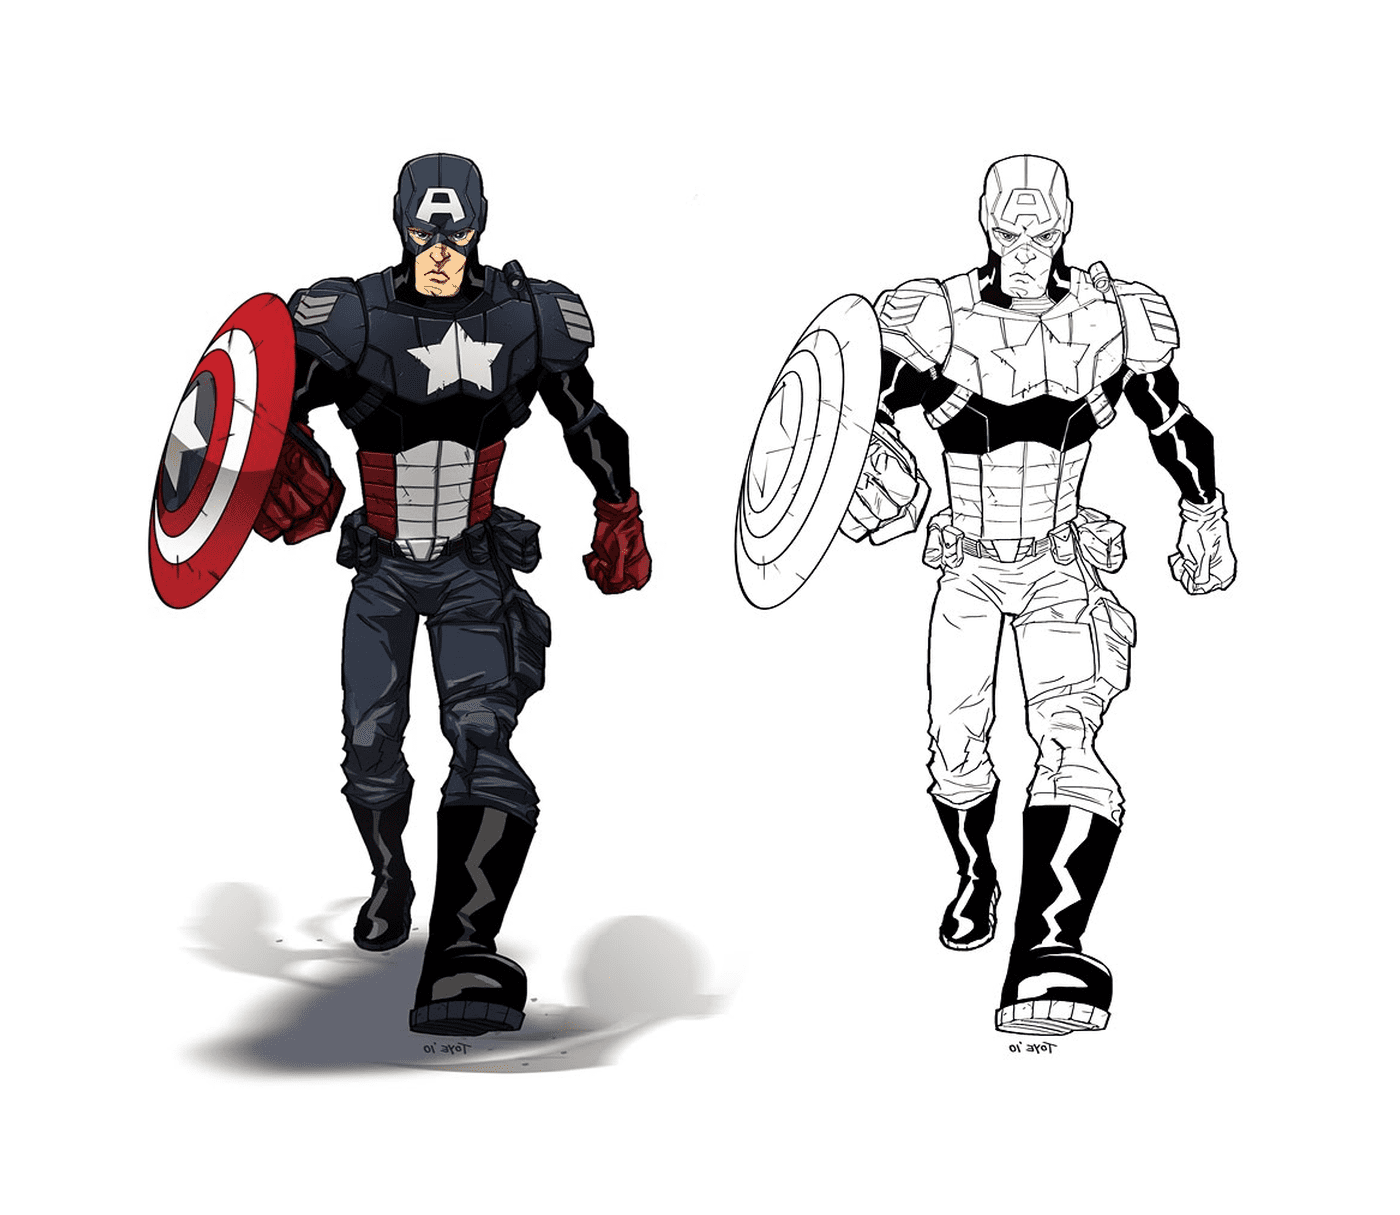  Colouring Captain America 43, character of Captain America 